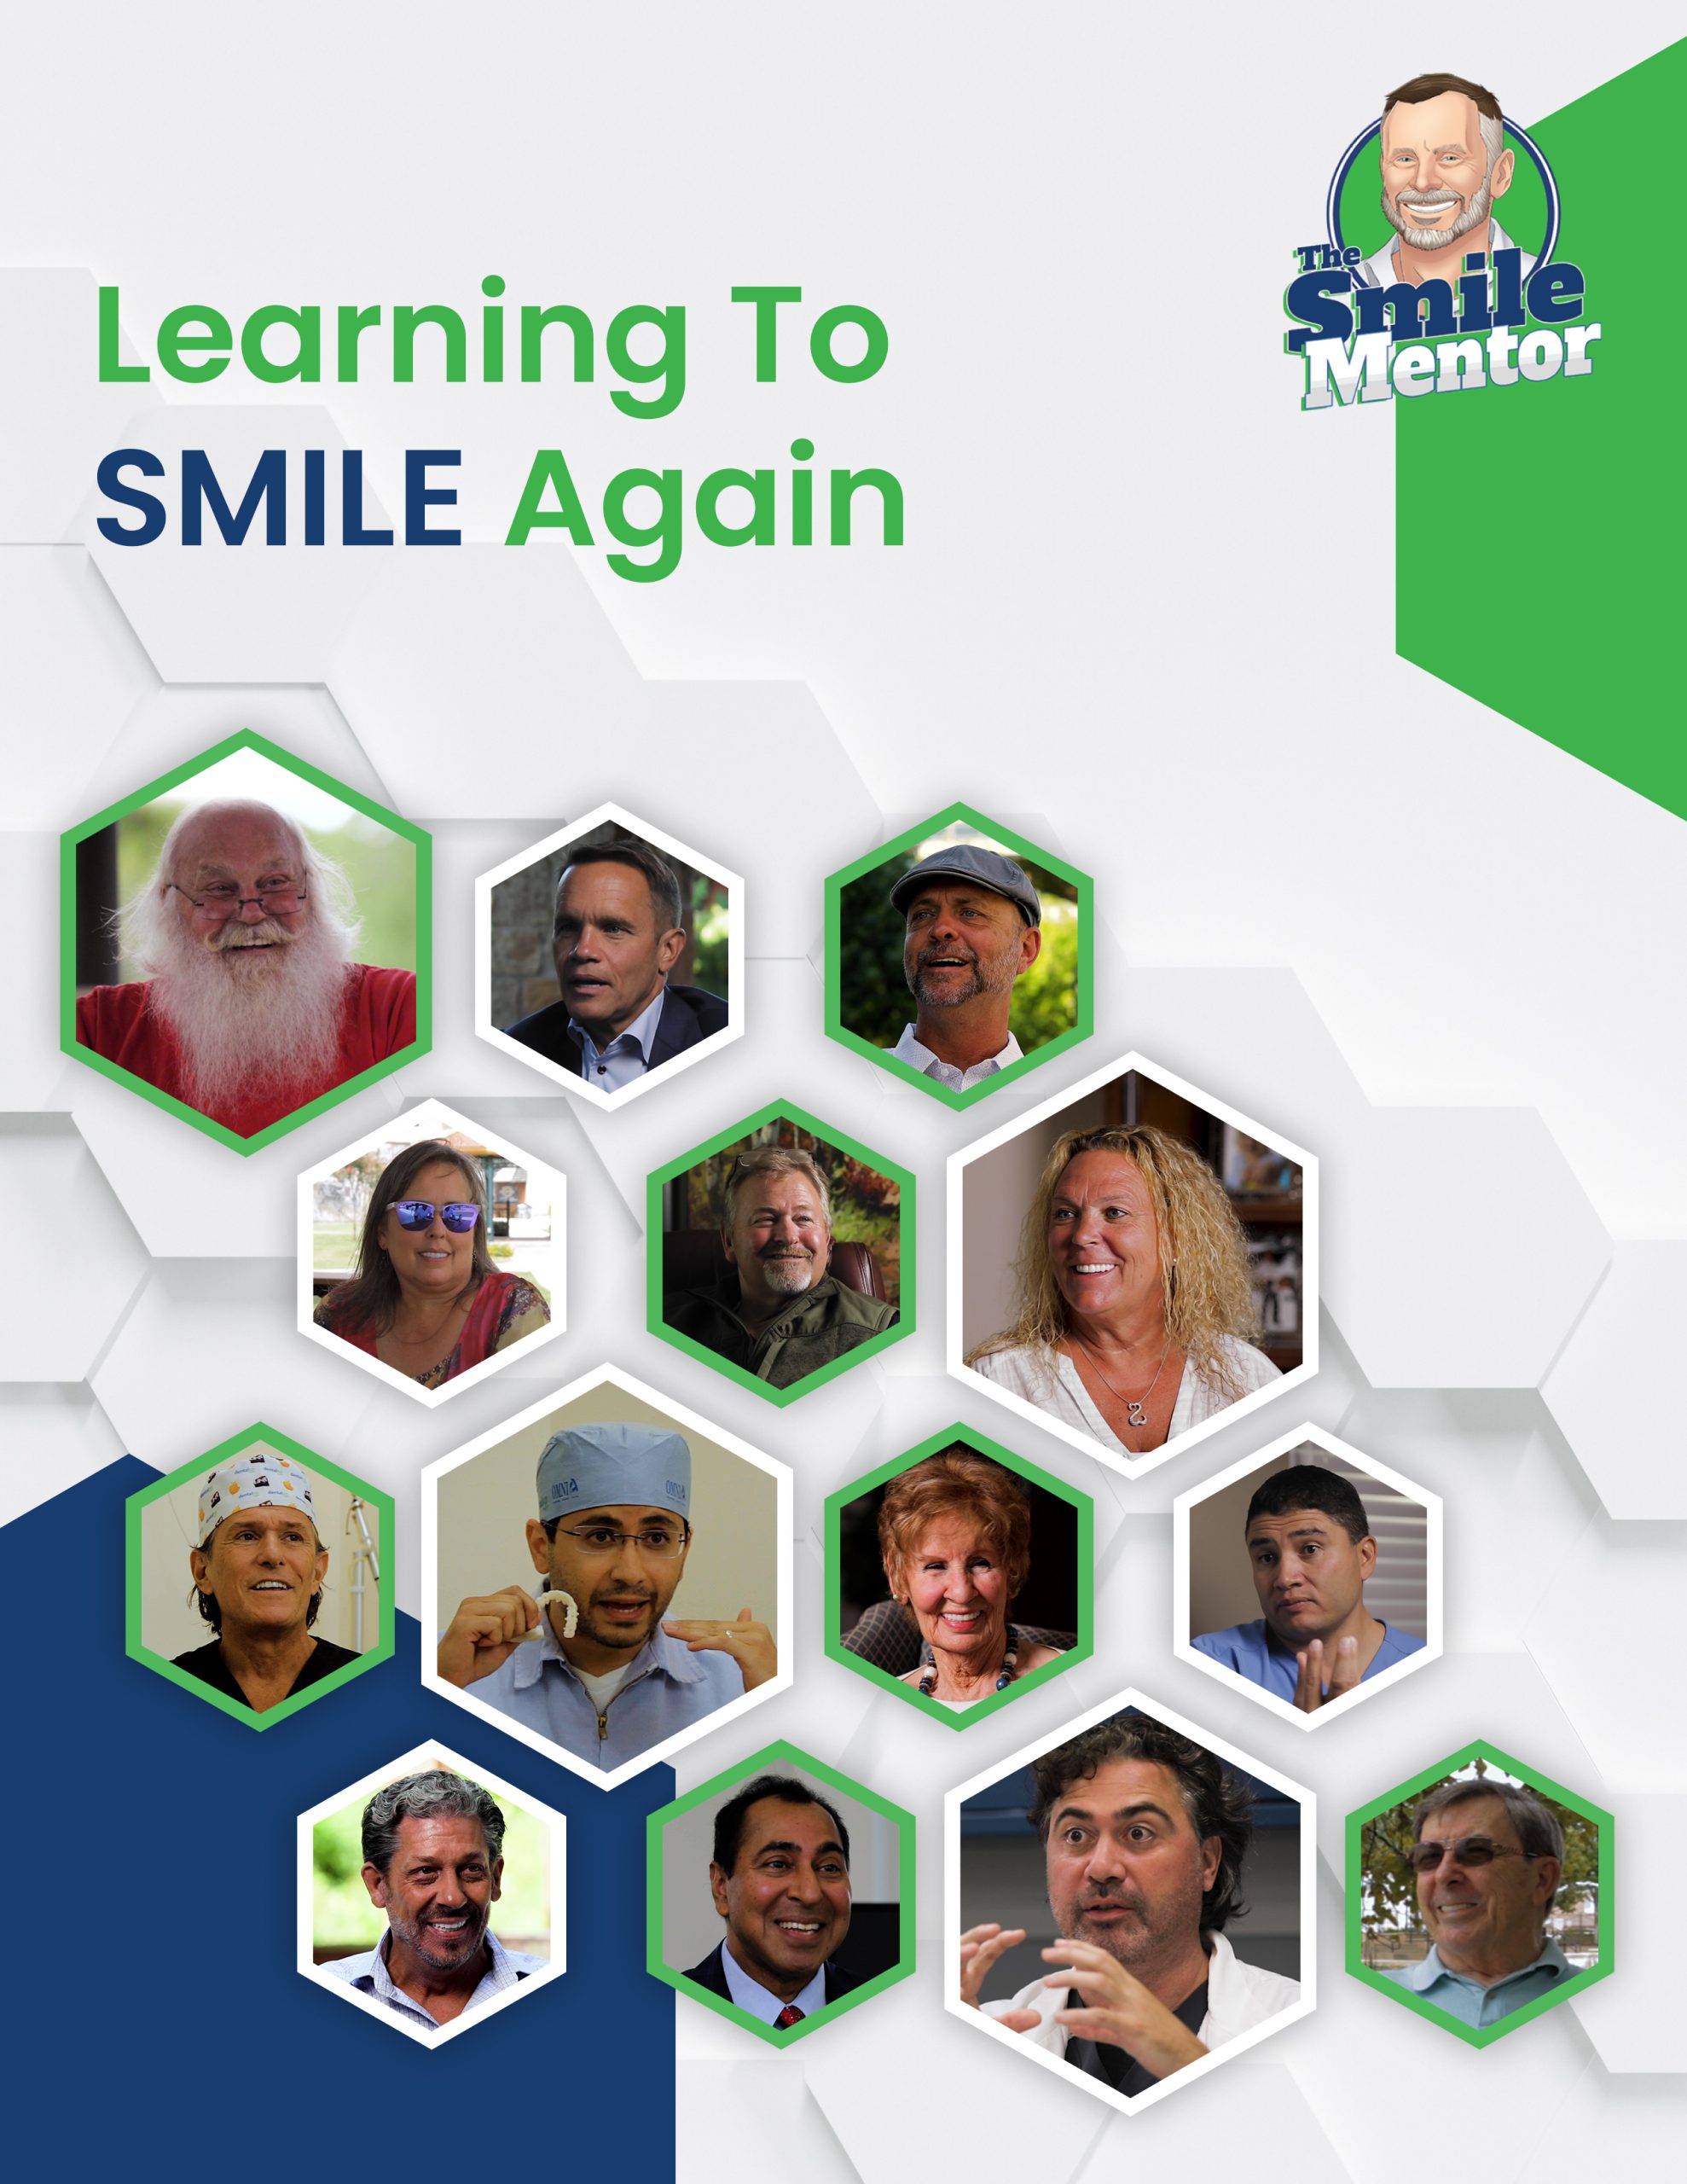 The Smile Mentor